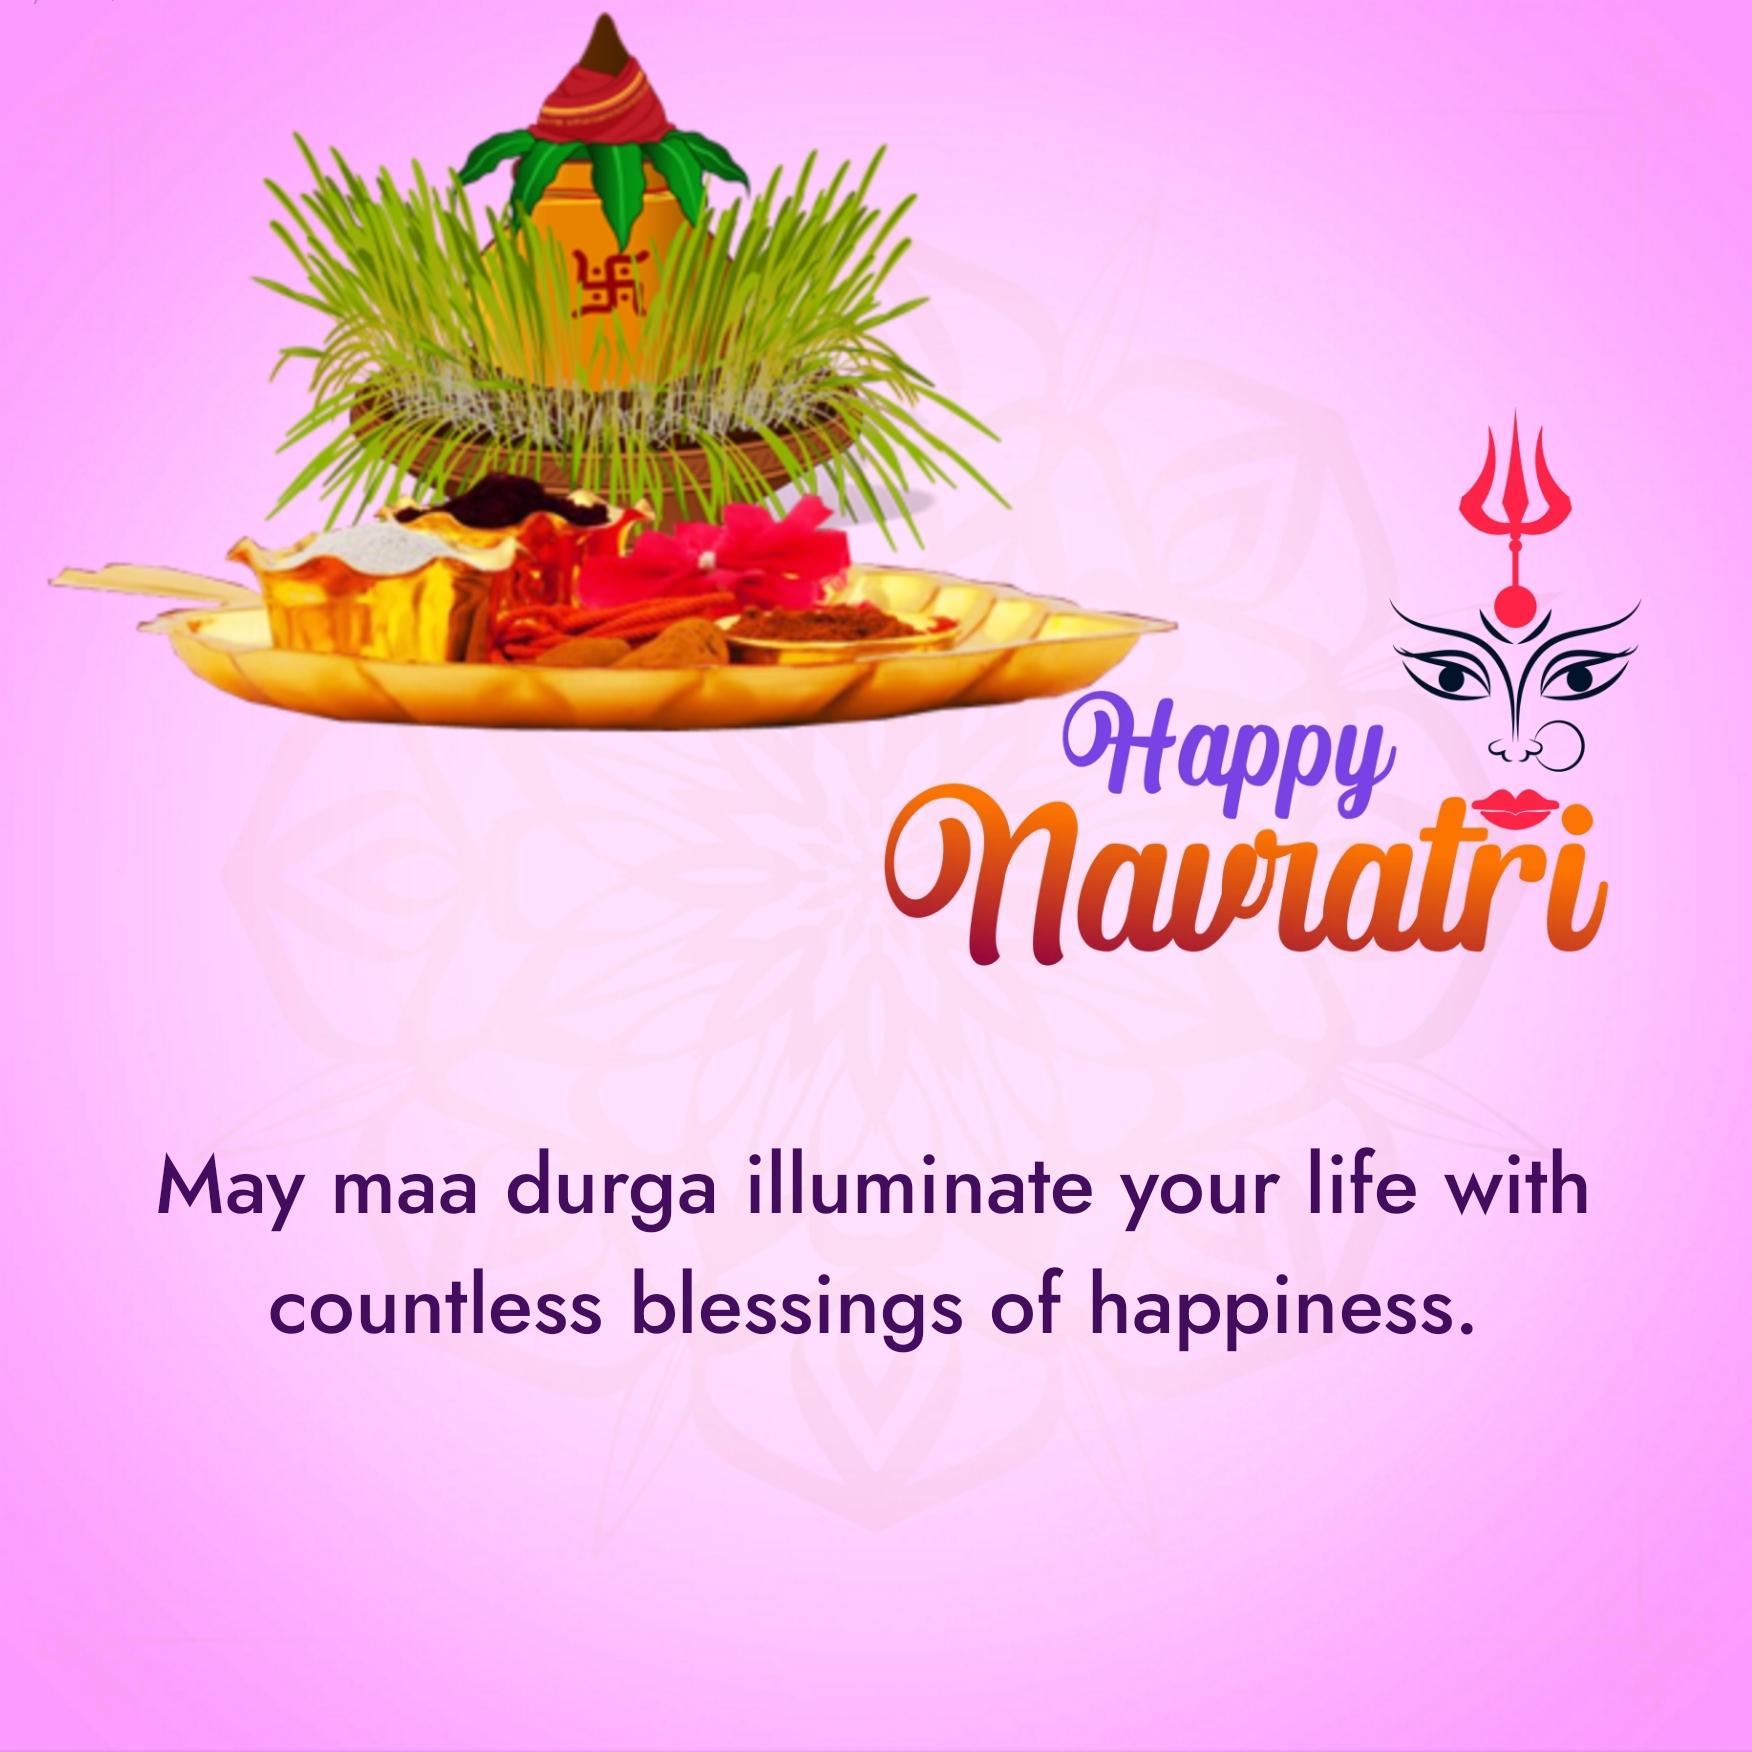 May maa durga illuminate your life with countless blessings